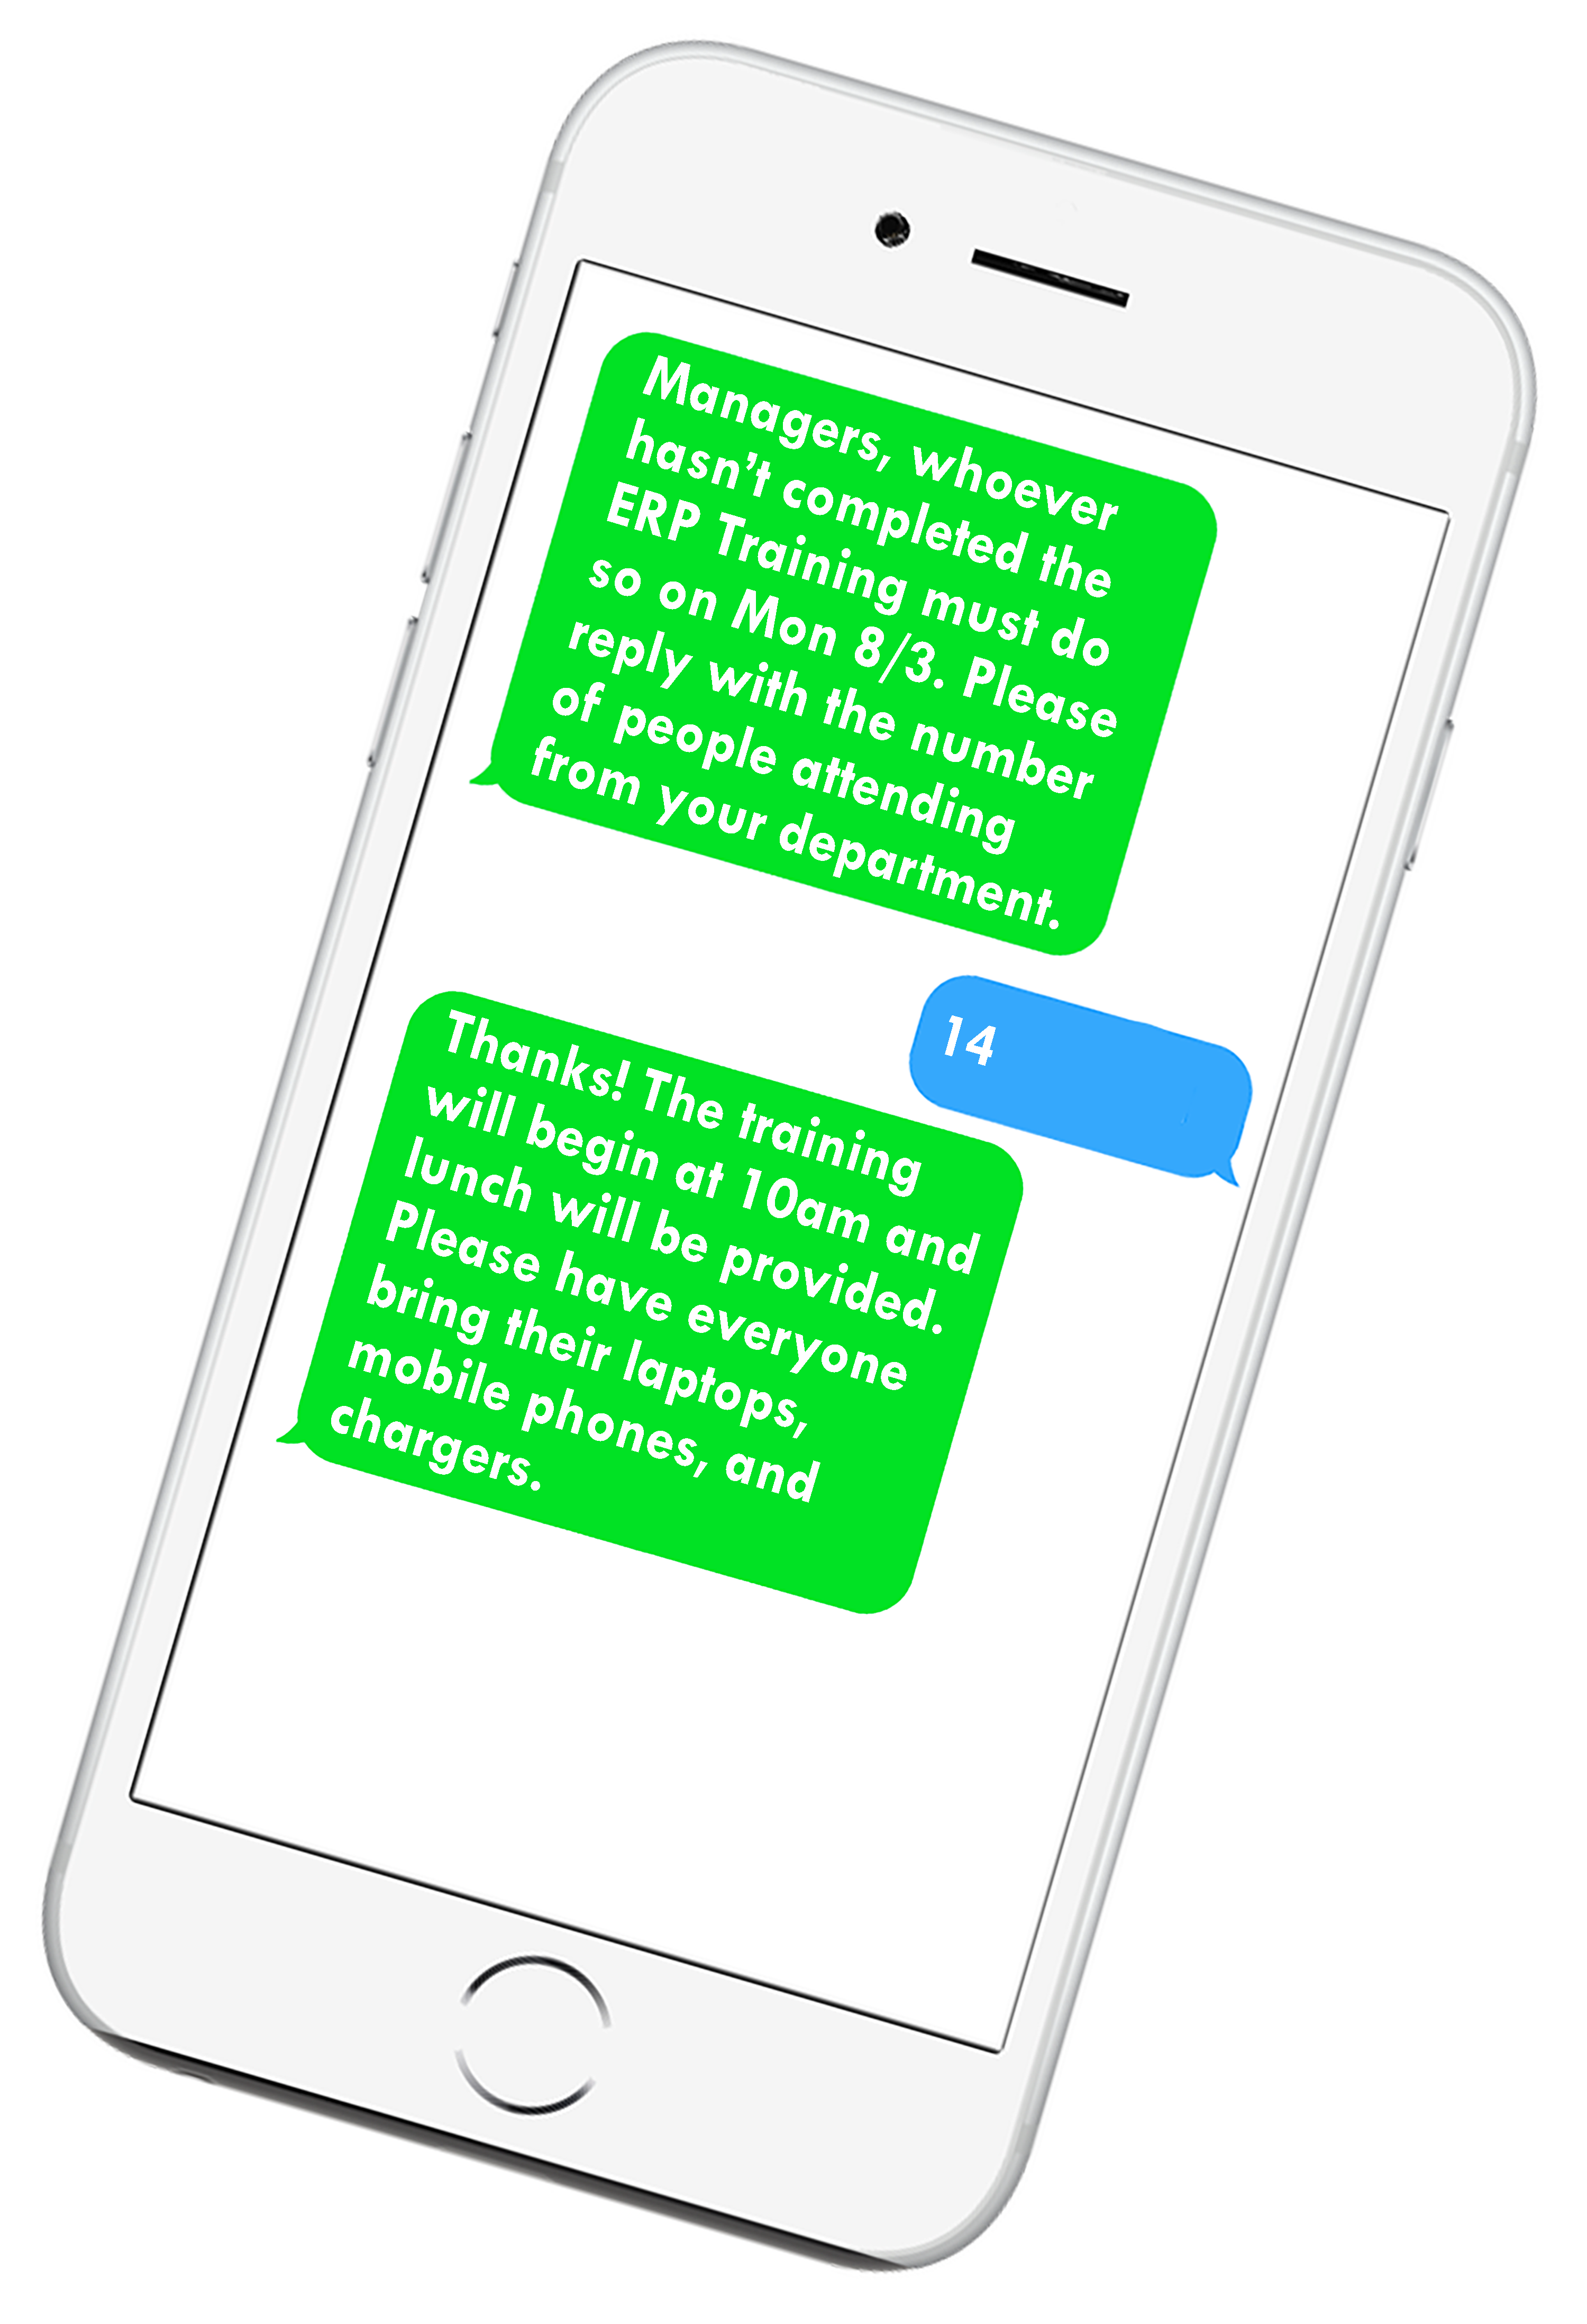 Slooce SMS for Staffing Texting for recruiting mobile messaging for human resources hr